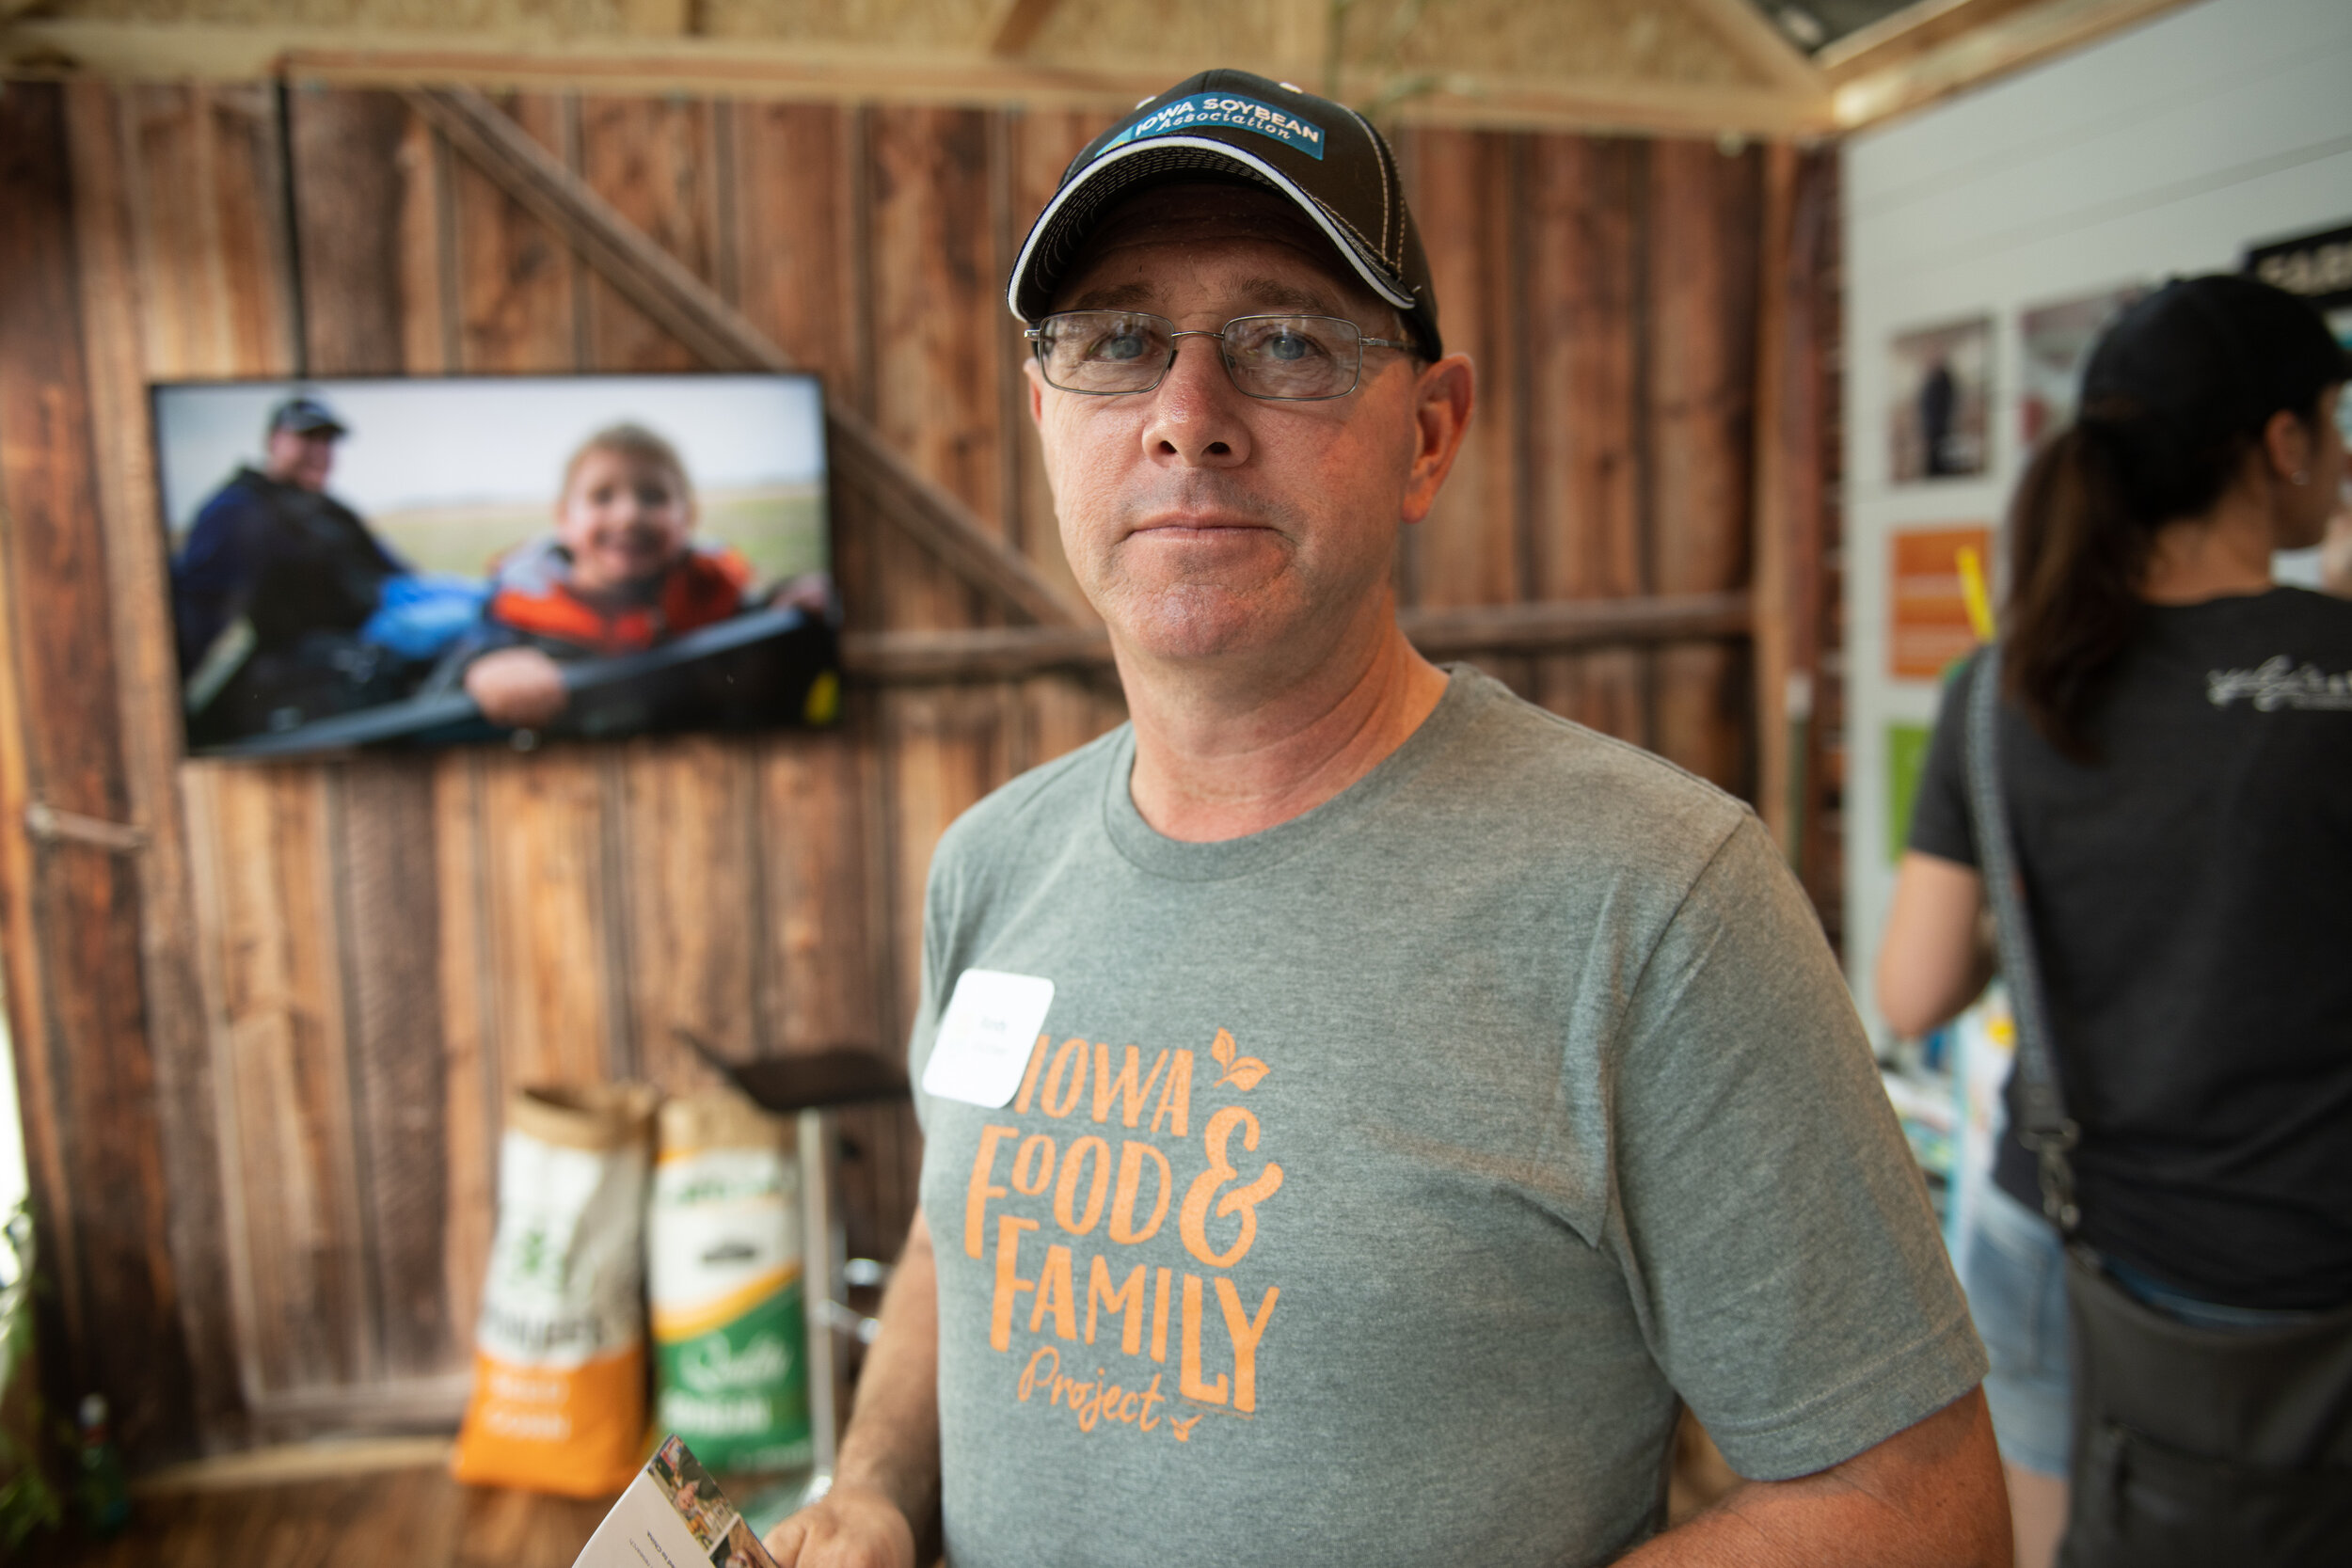 In 2018, fairgoers were invited to follow a farmer from the field to the kitchen table. Randy Miller, a farmer from Lacona, shares his perspective on farm life with visitors.